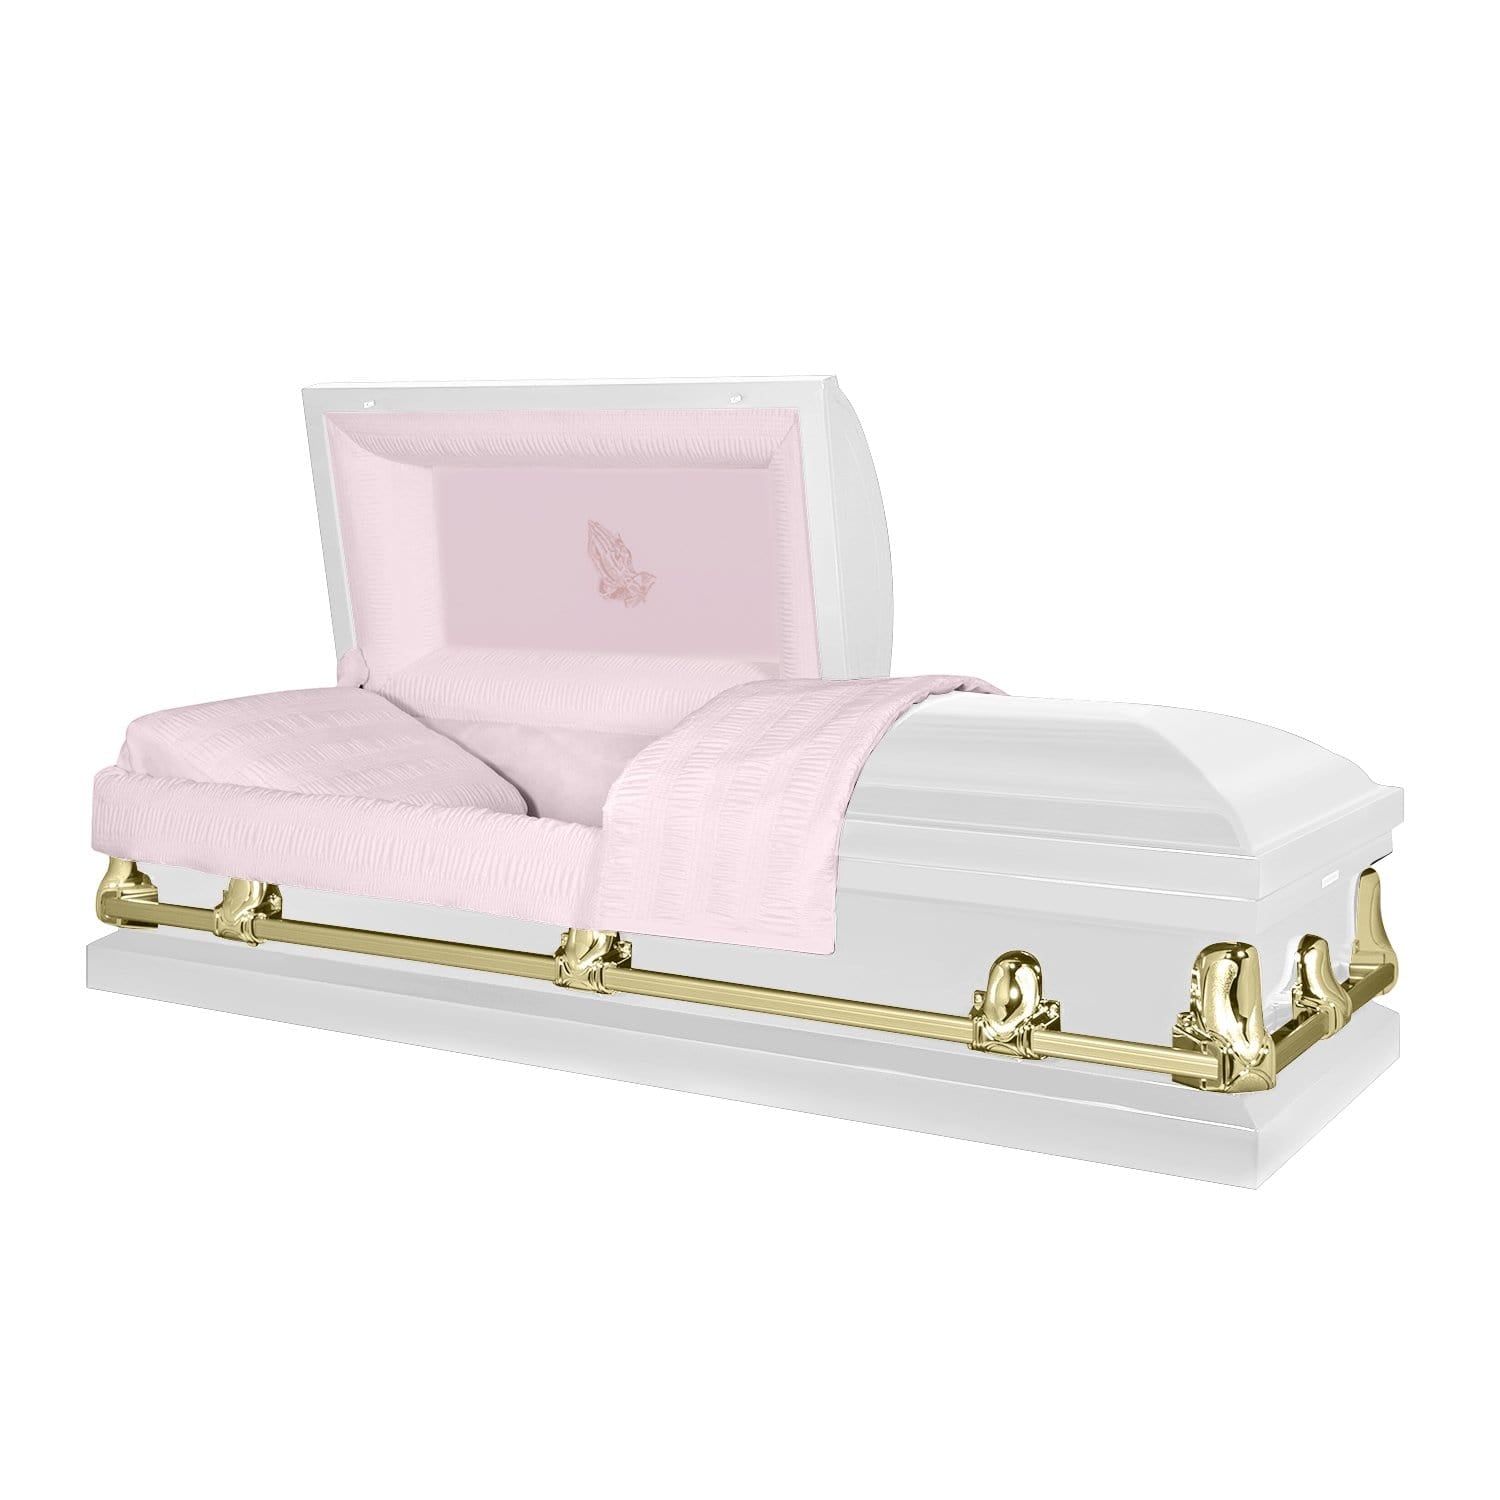 Orion Series | White and Gold Steel Casket with Pink Interior - Titan Casket